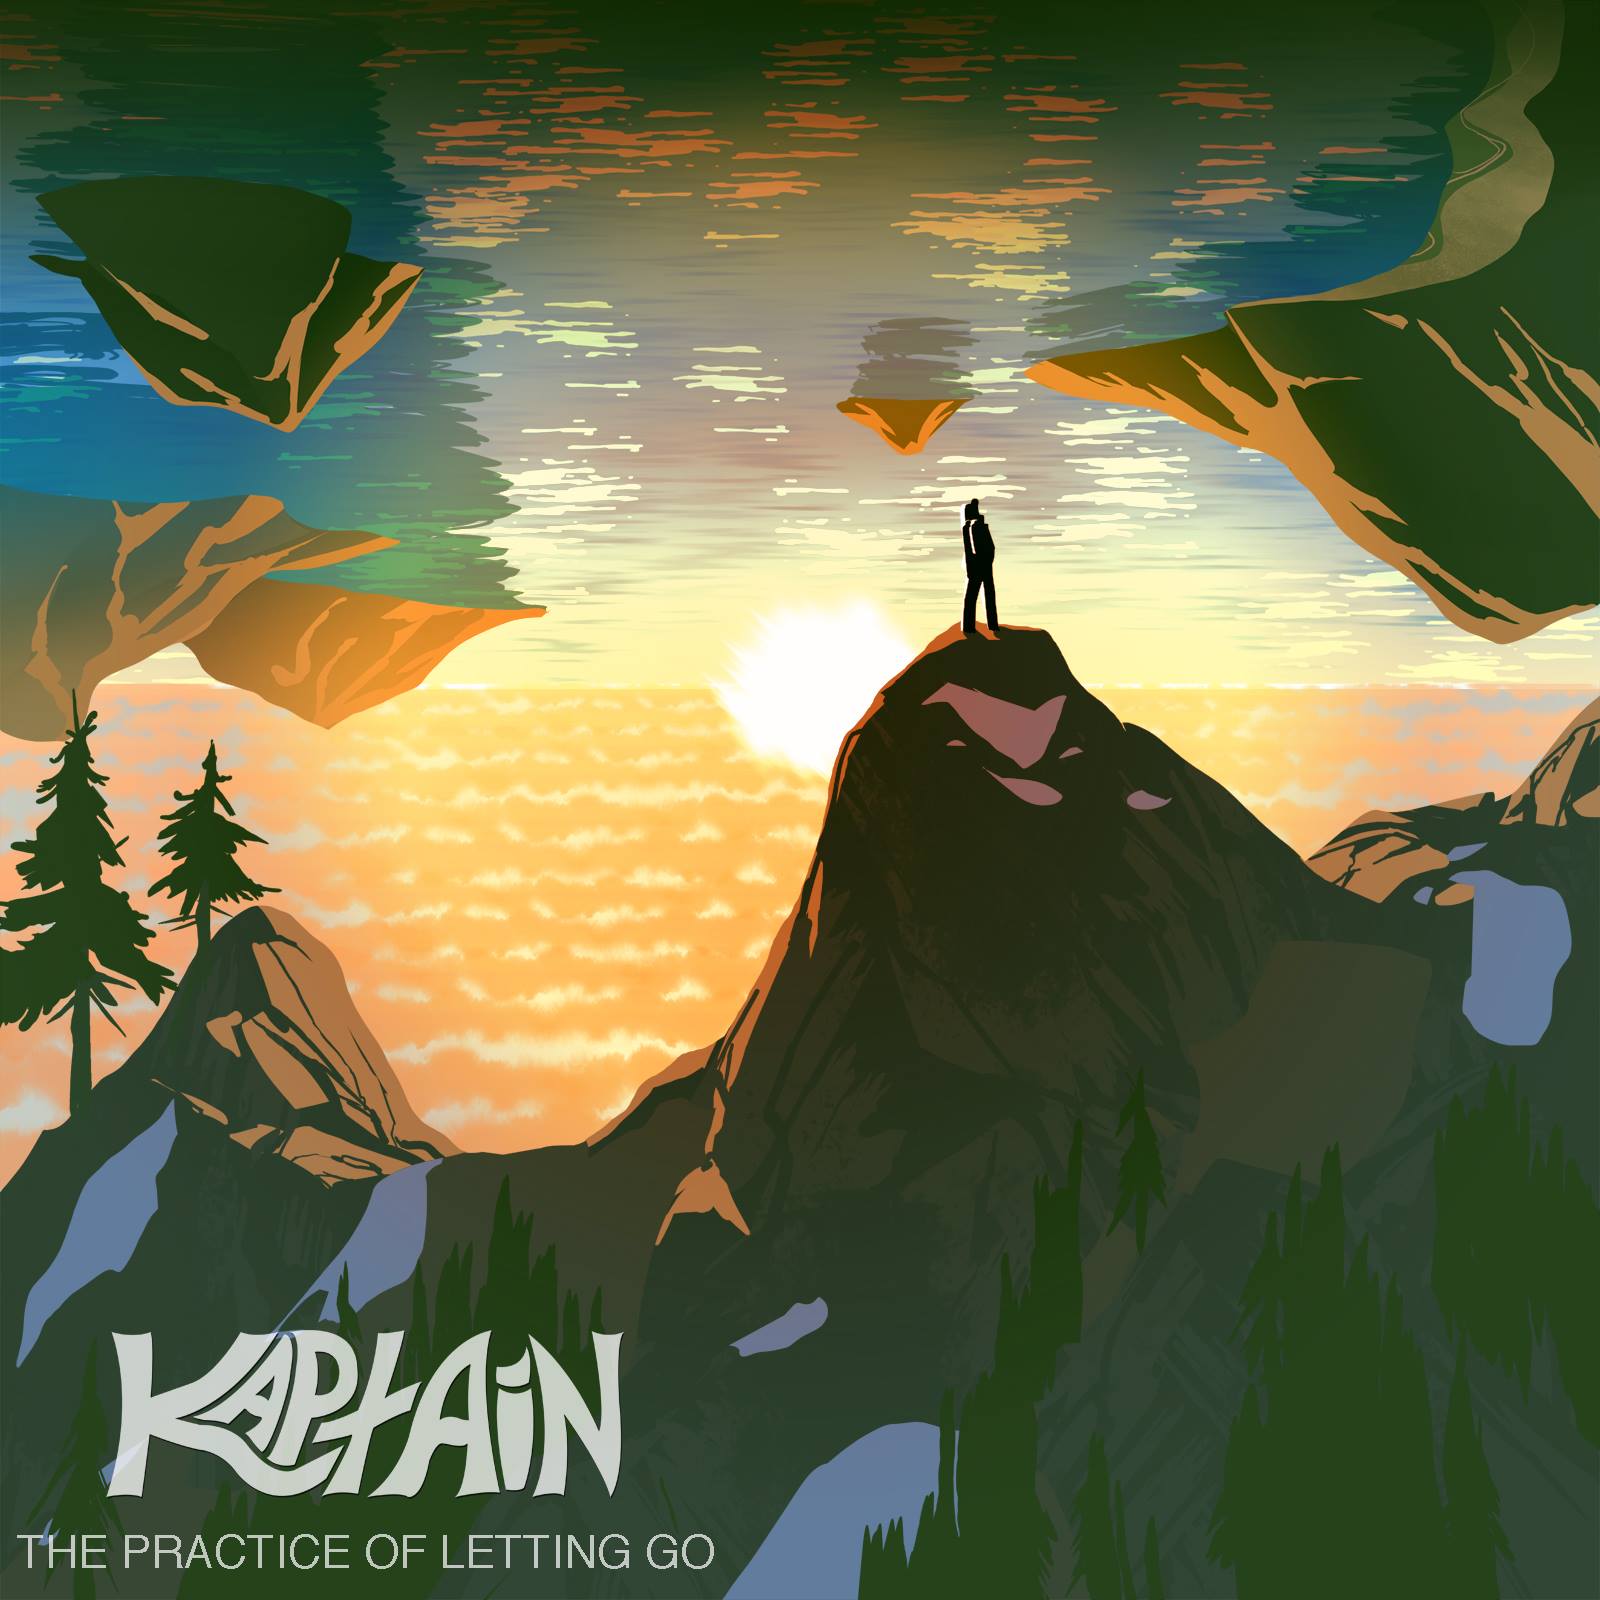 Kaptain - The Practice of Letting Go